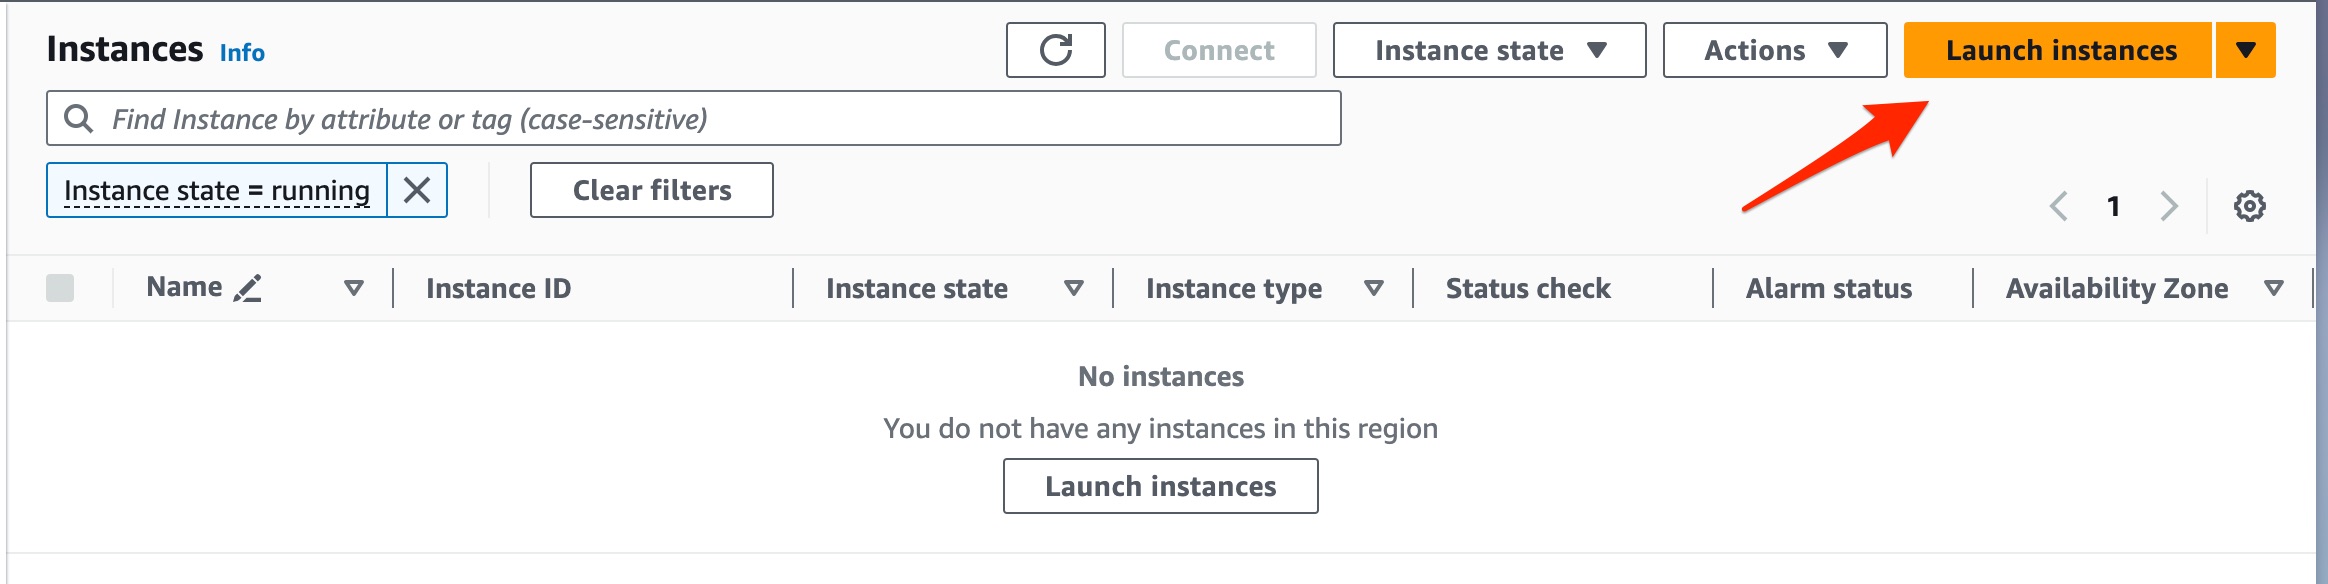 Screenshot indicating the Launch Instances button